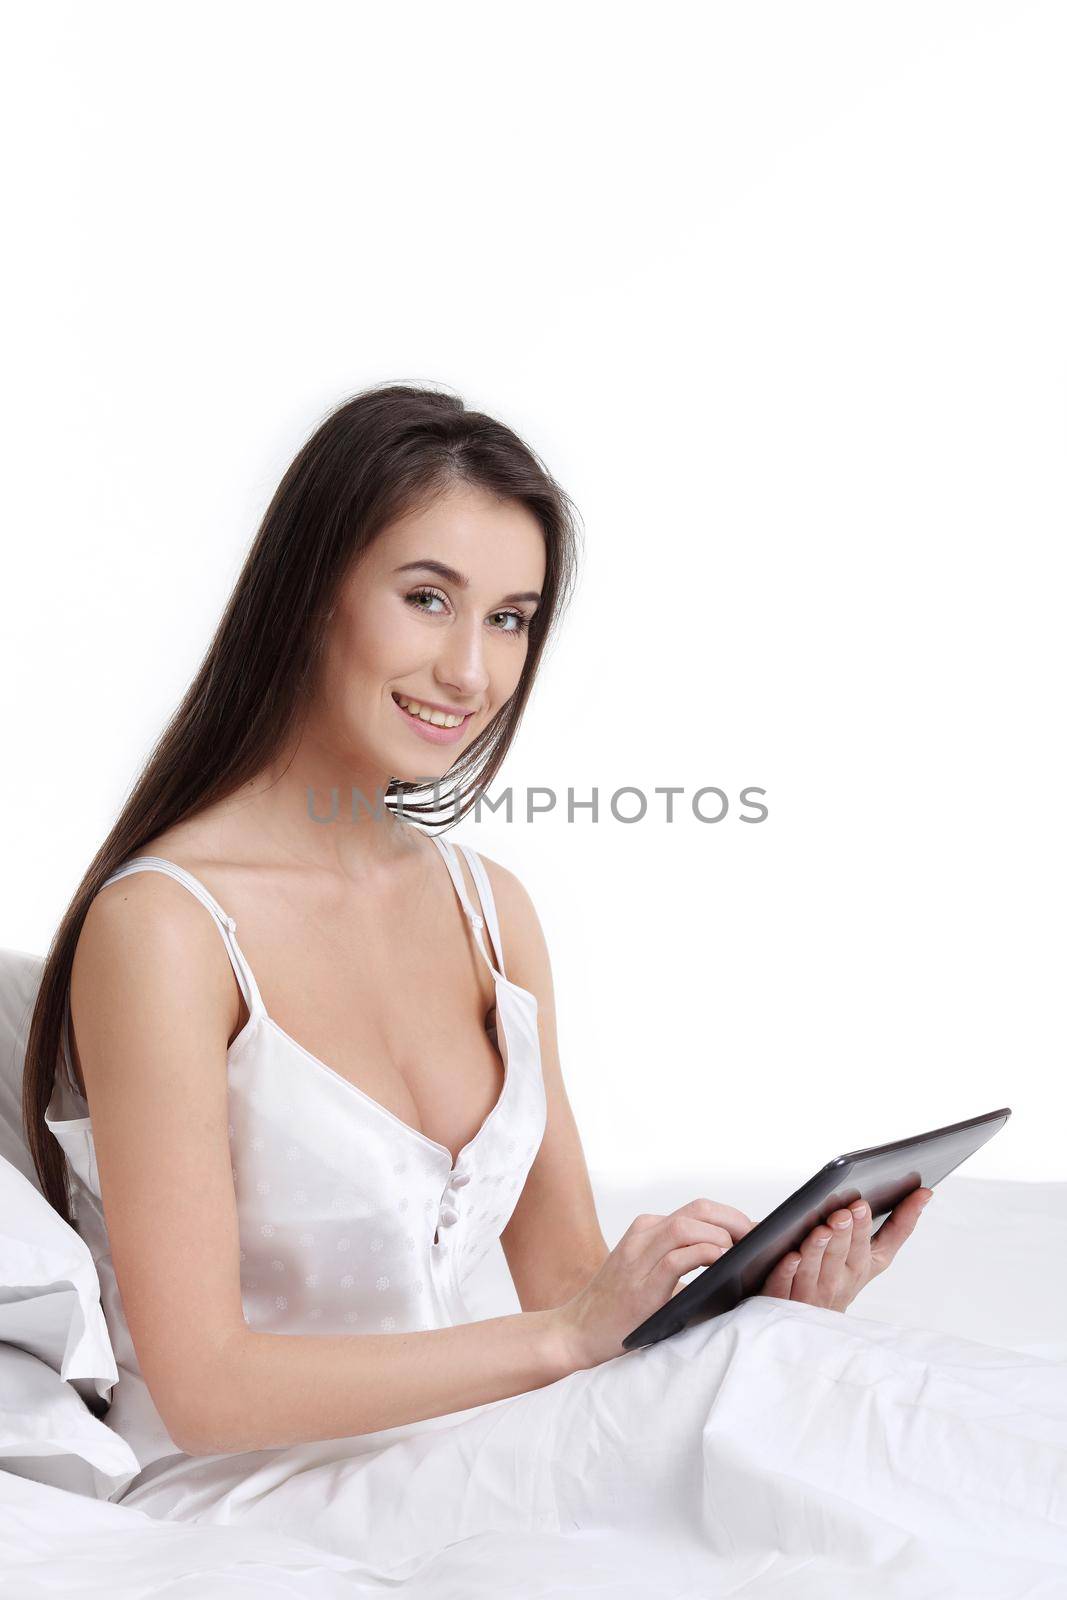 Smiling woman catching up on her social media as she relaxes in bed with a laptop computer